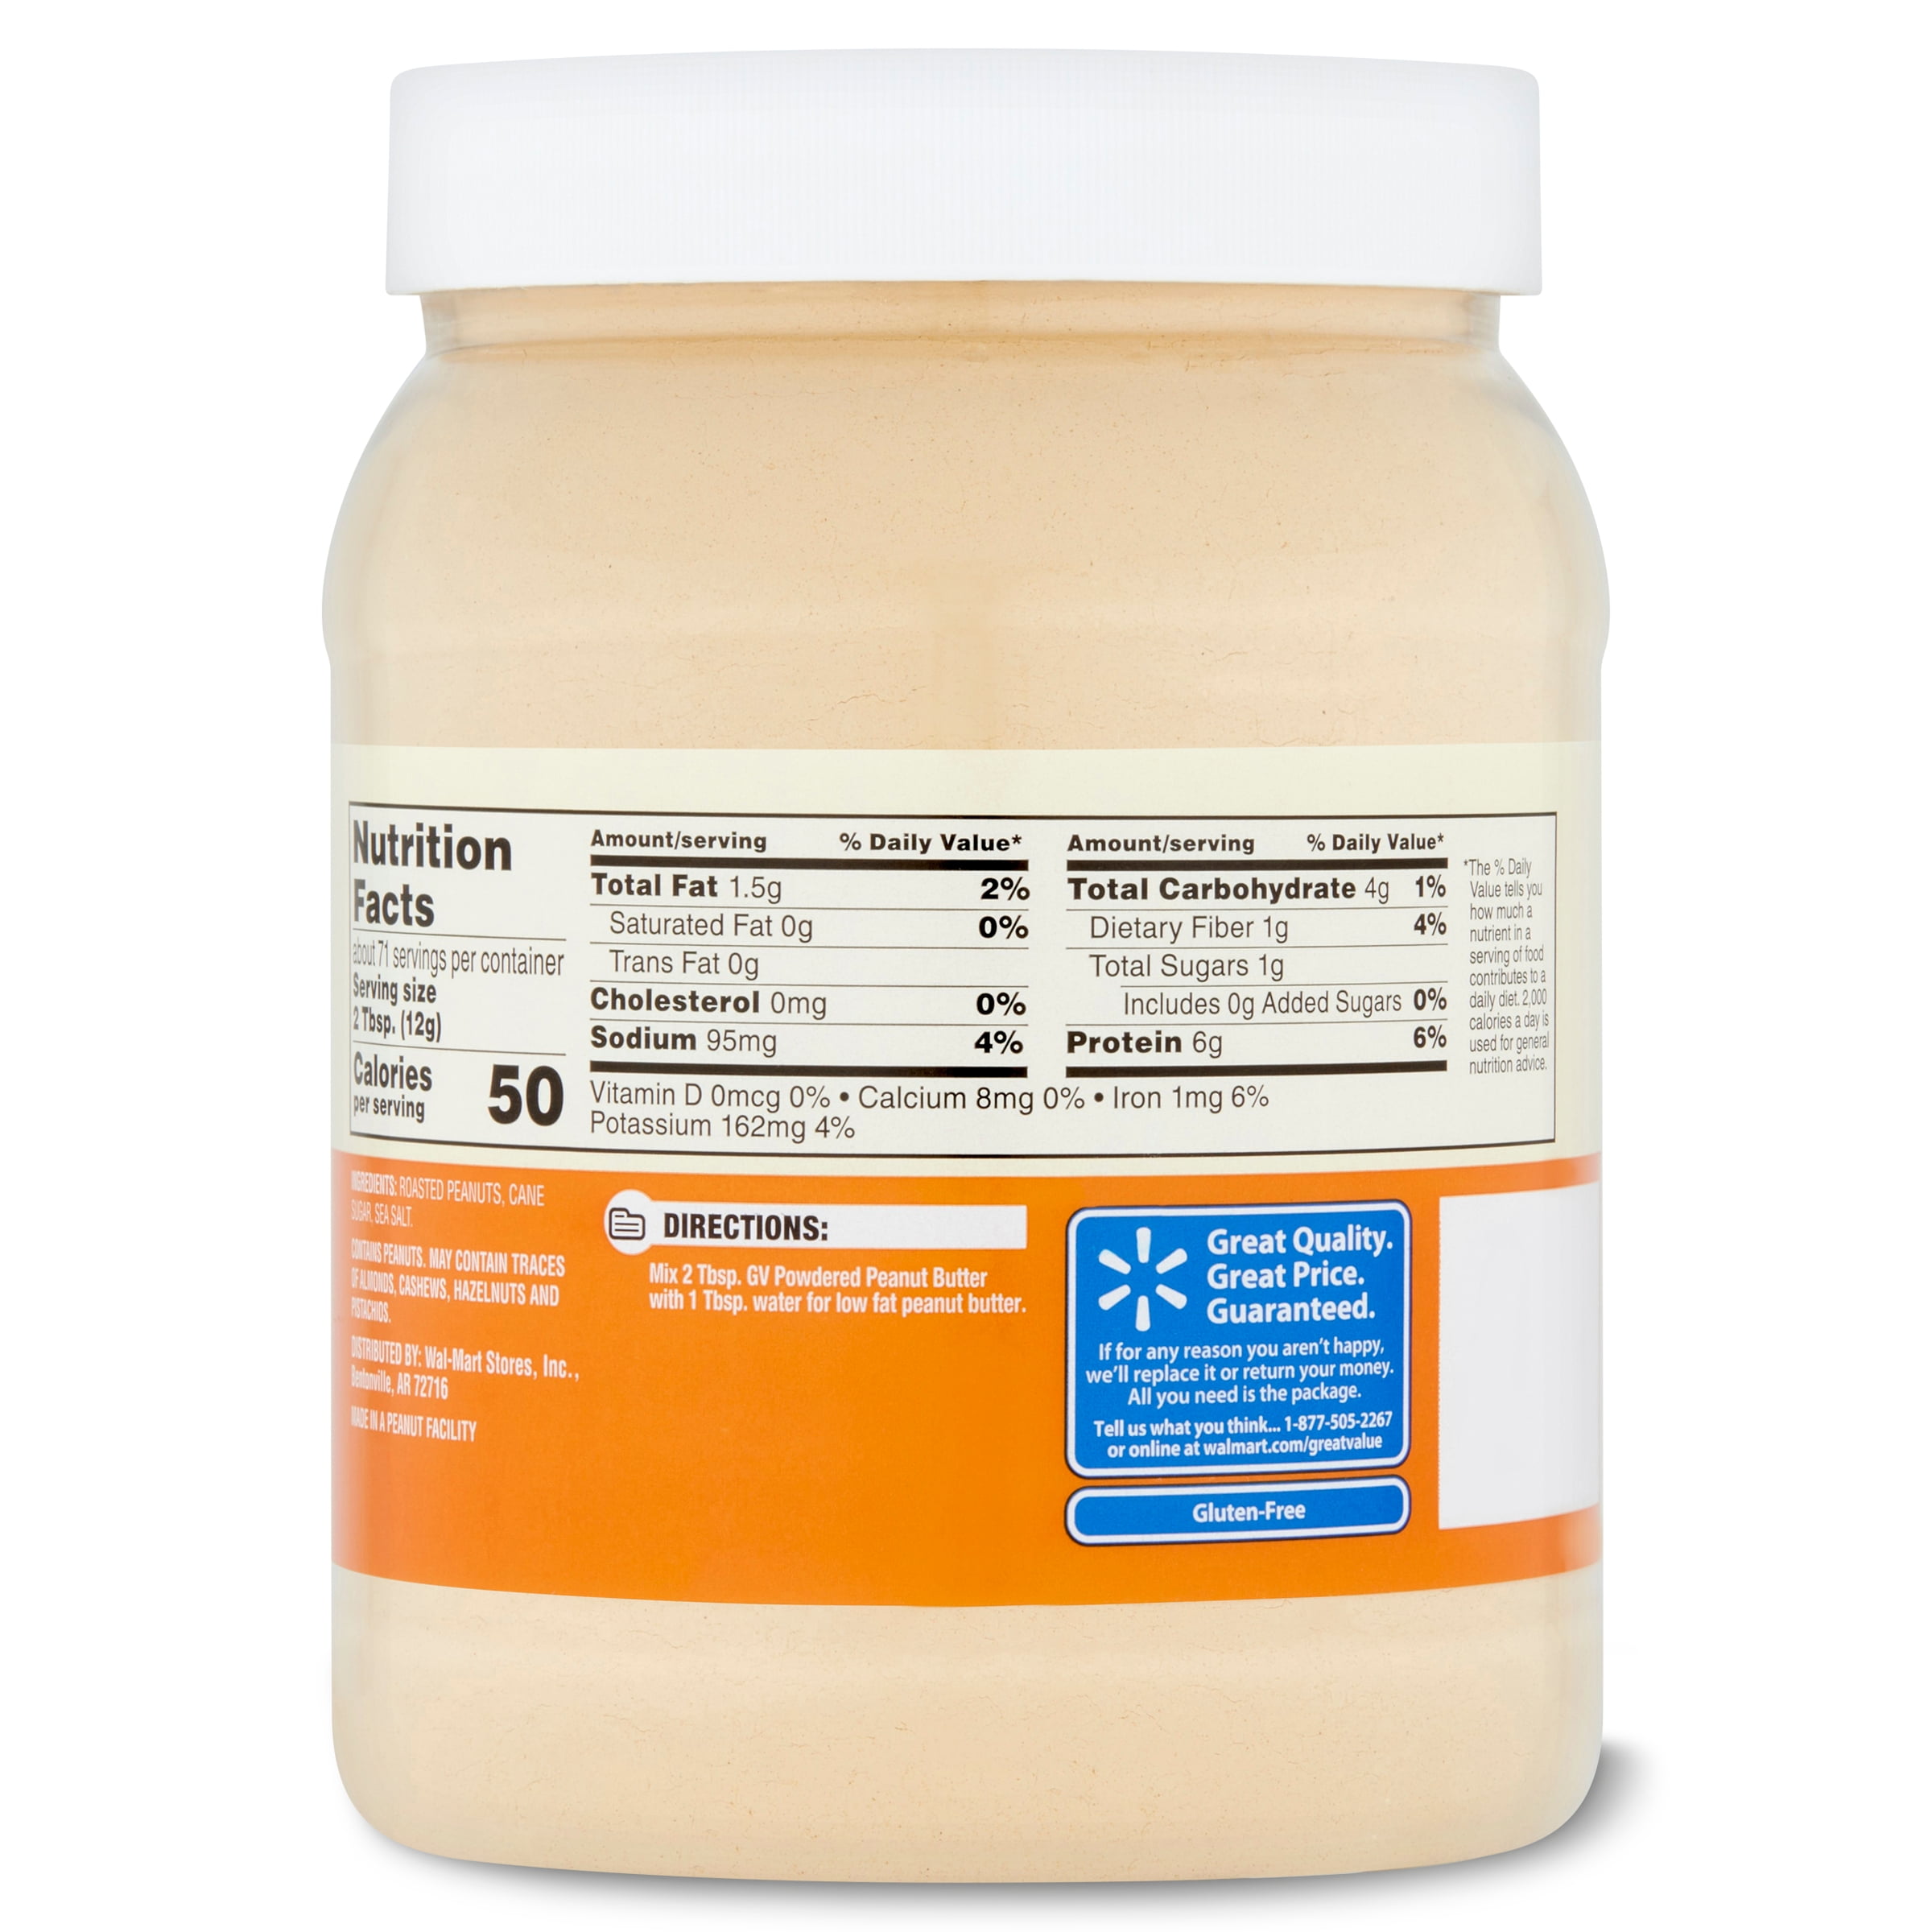 Great Value Powdered Peanut Butter, 30 oz